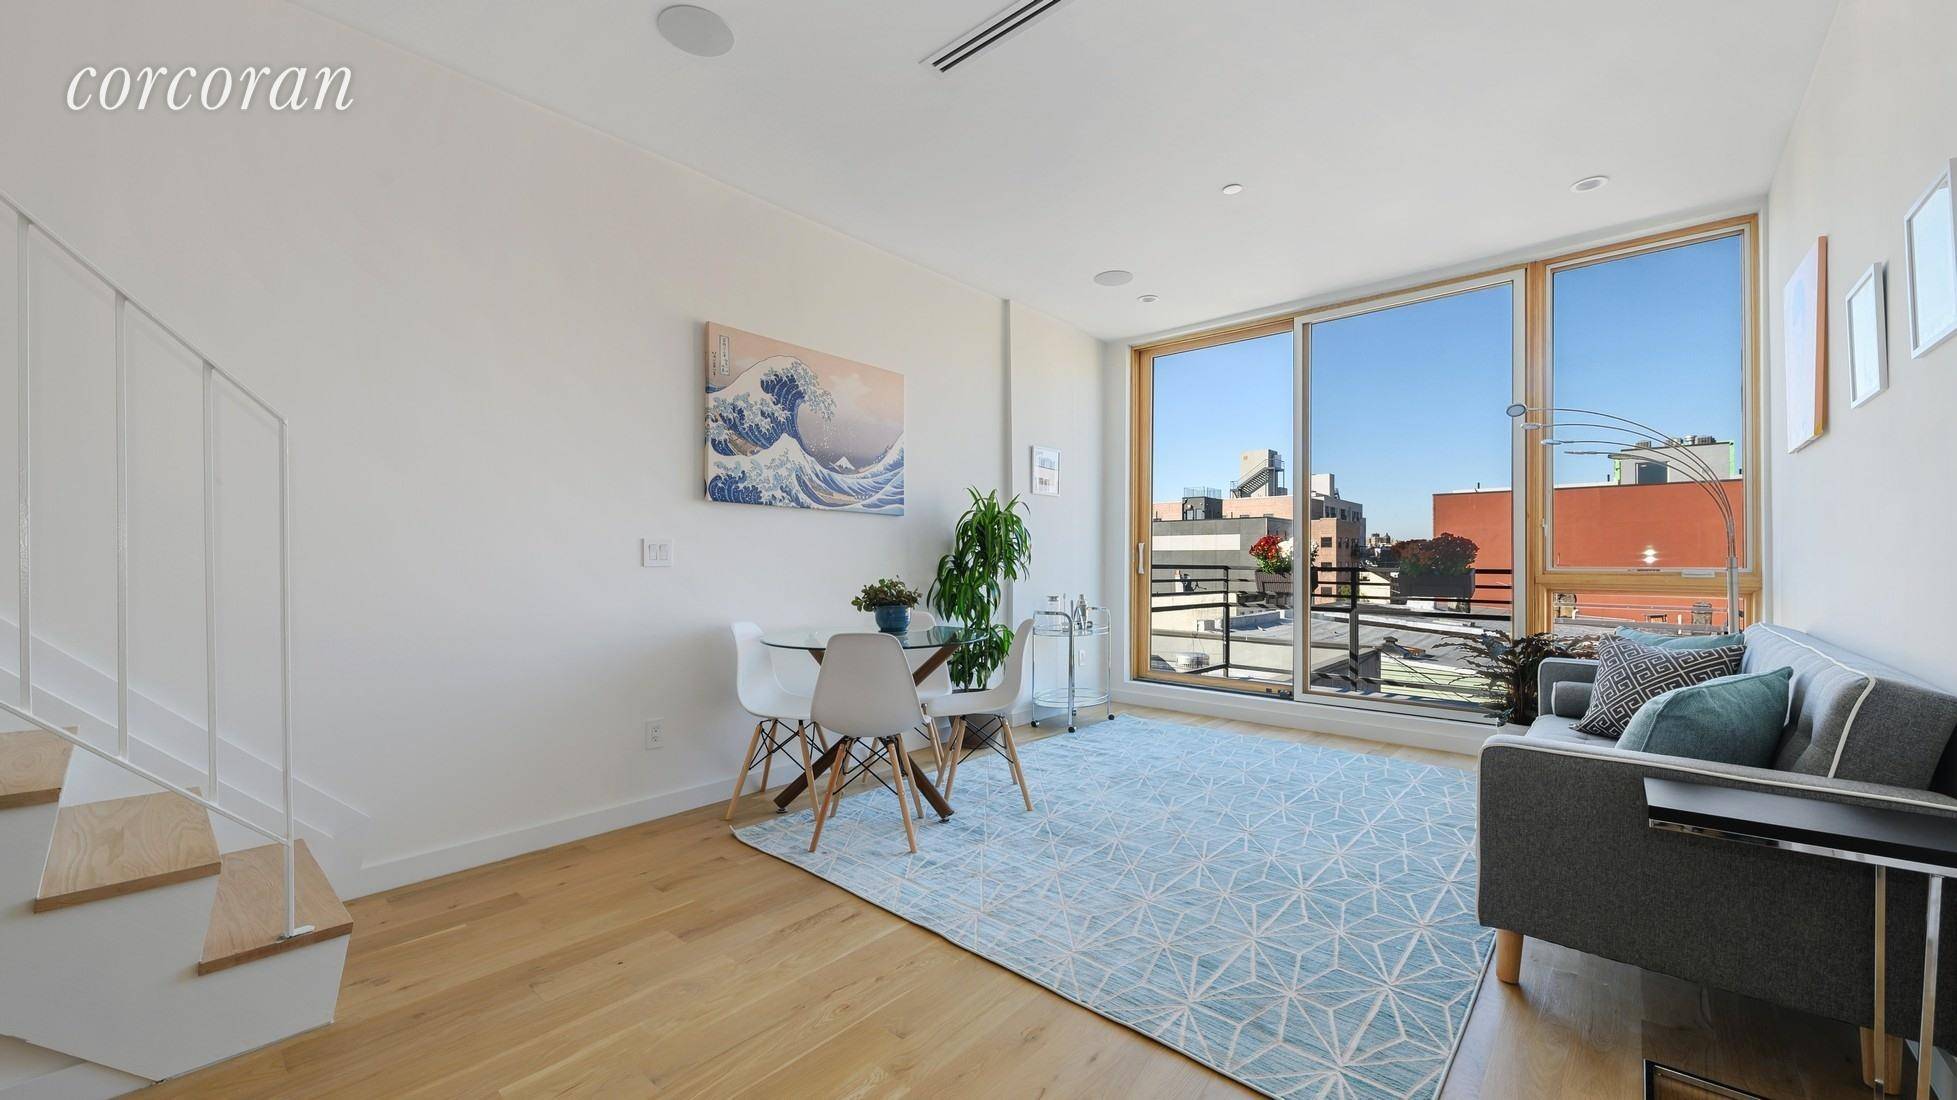 168 Evergreen is an 8 unit condominium, an architectural gem masterfully designed to reflect the artistic flair of this fashionable Bushwick neighborhood with its unequaled quality construction, refined finishes and ...